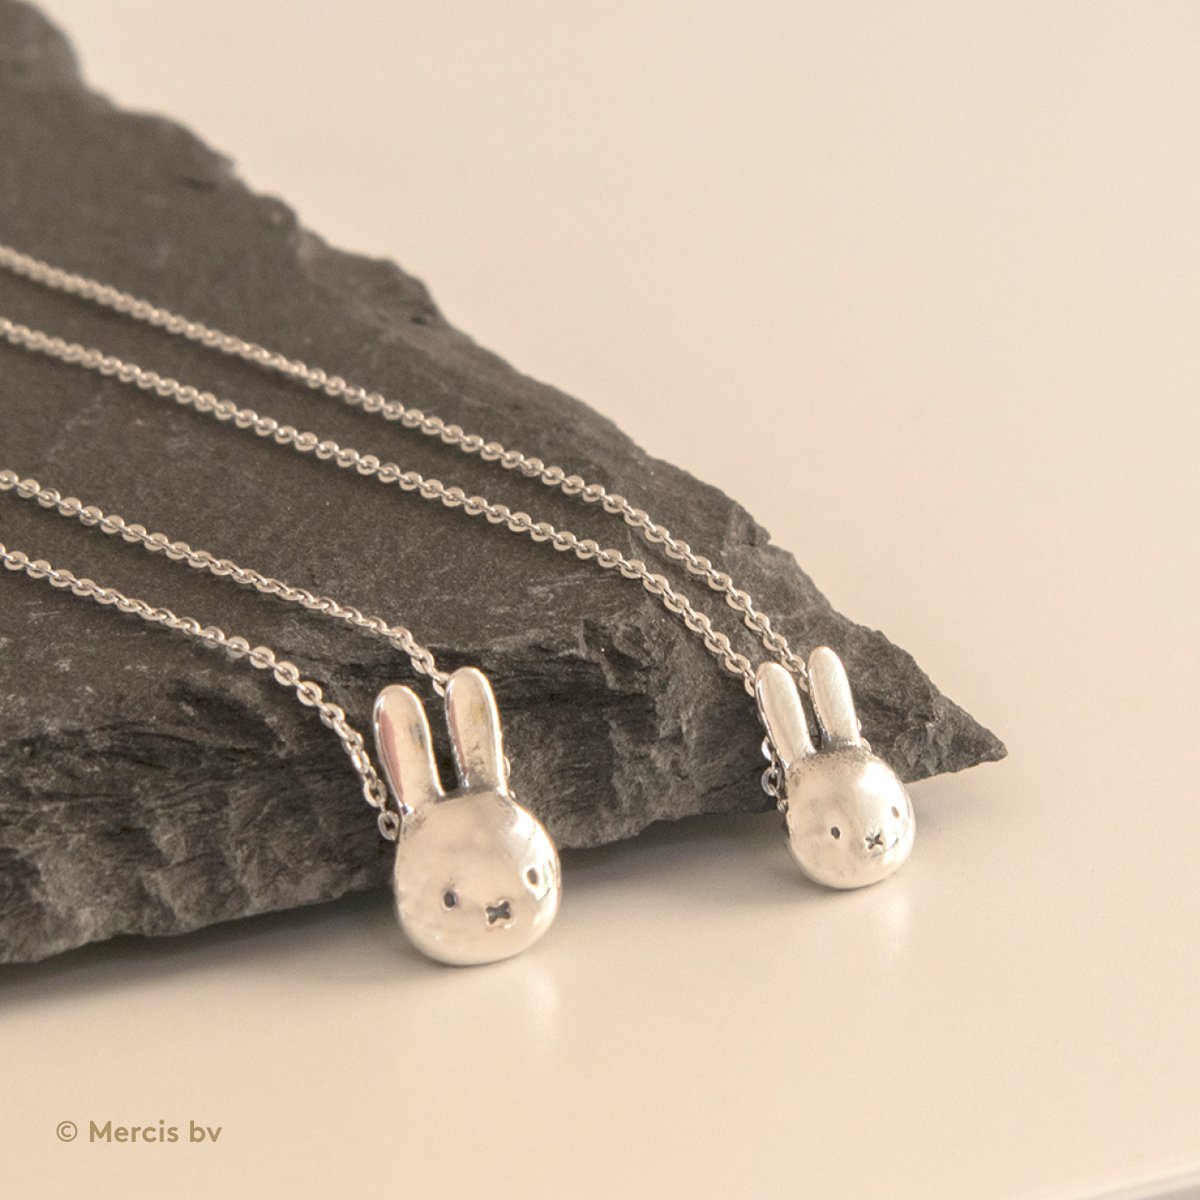 Happy #NationalBestFriends Day! 

Tag the bestie you need matching @LicensedToCharm Miffy jewellery with below ⬇

licensedtocharm.com/miffy-sterling…